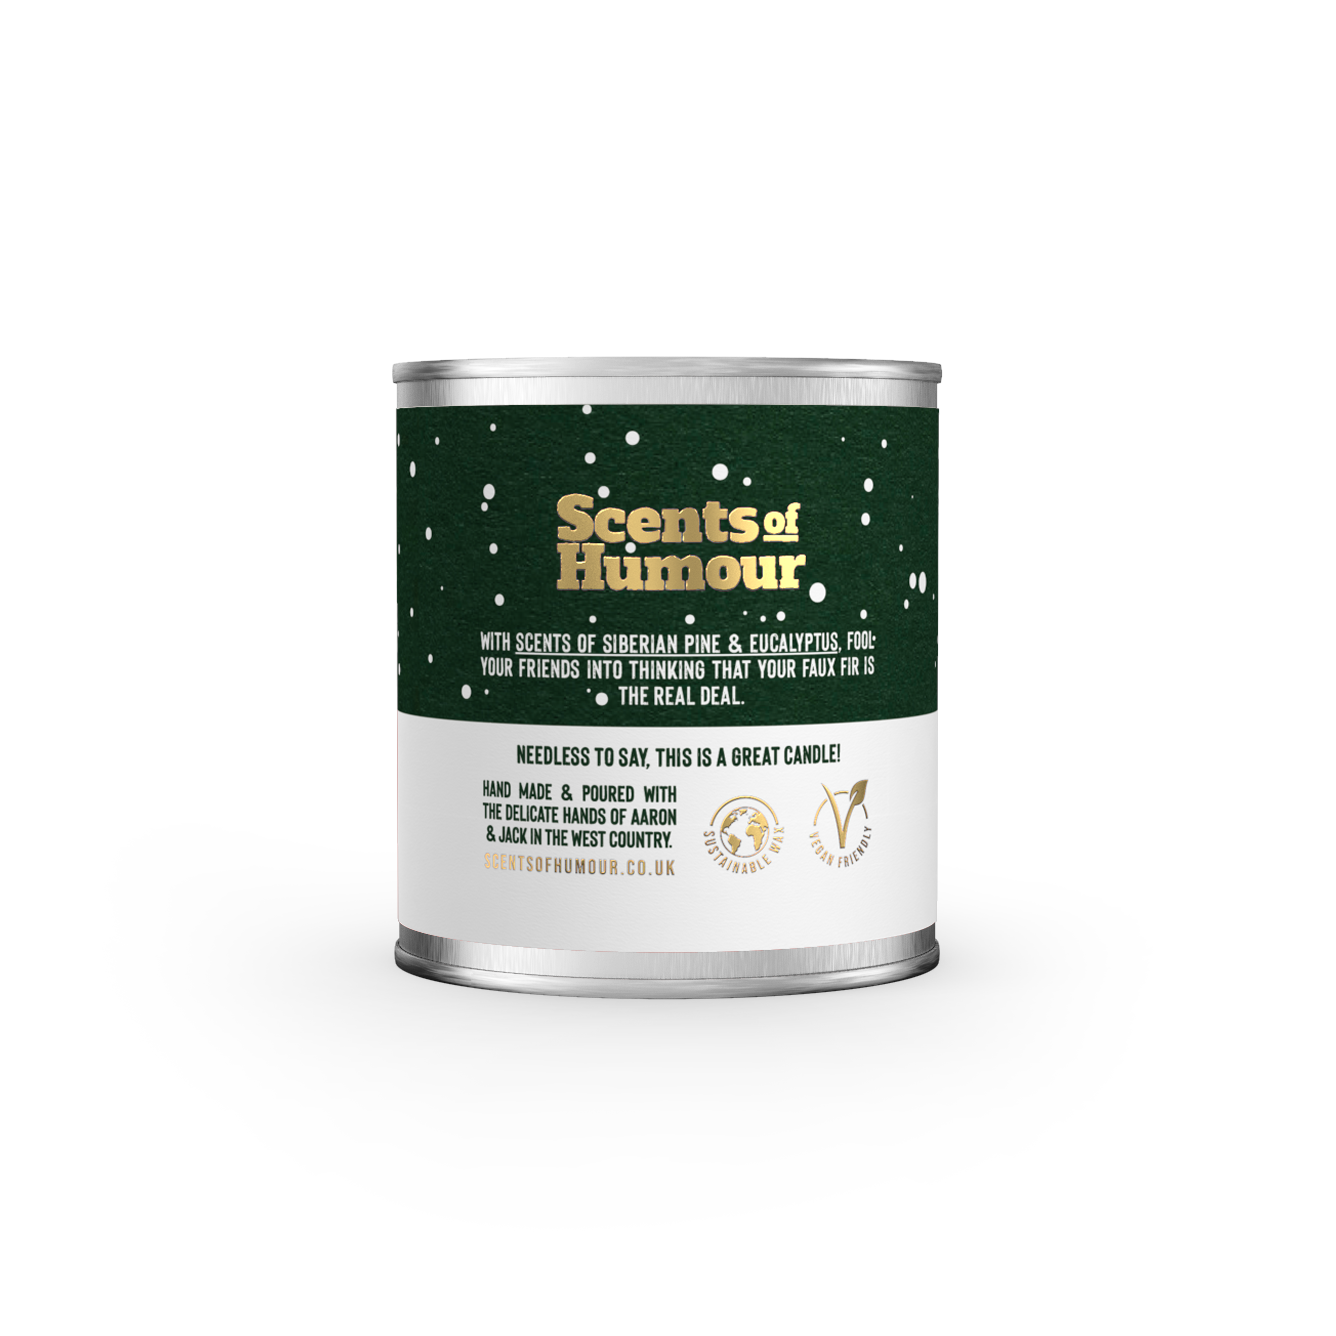 Faux Fir - Christmas Tree Scented Candle